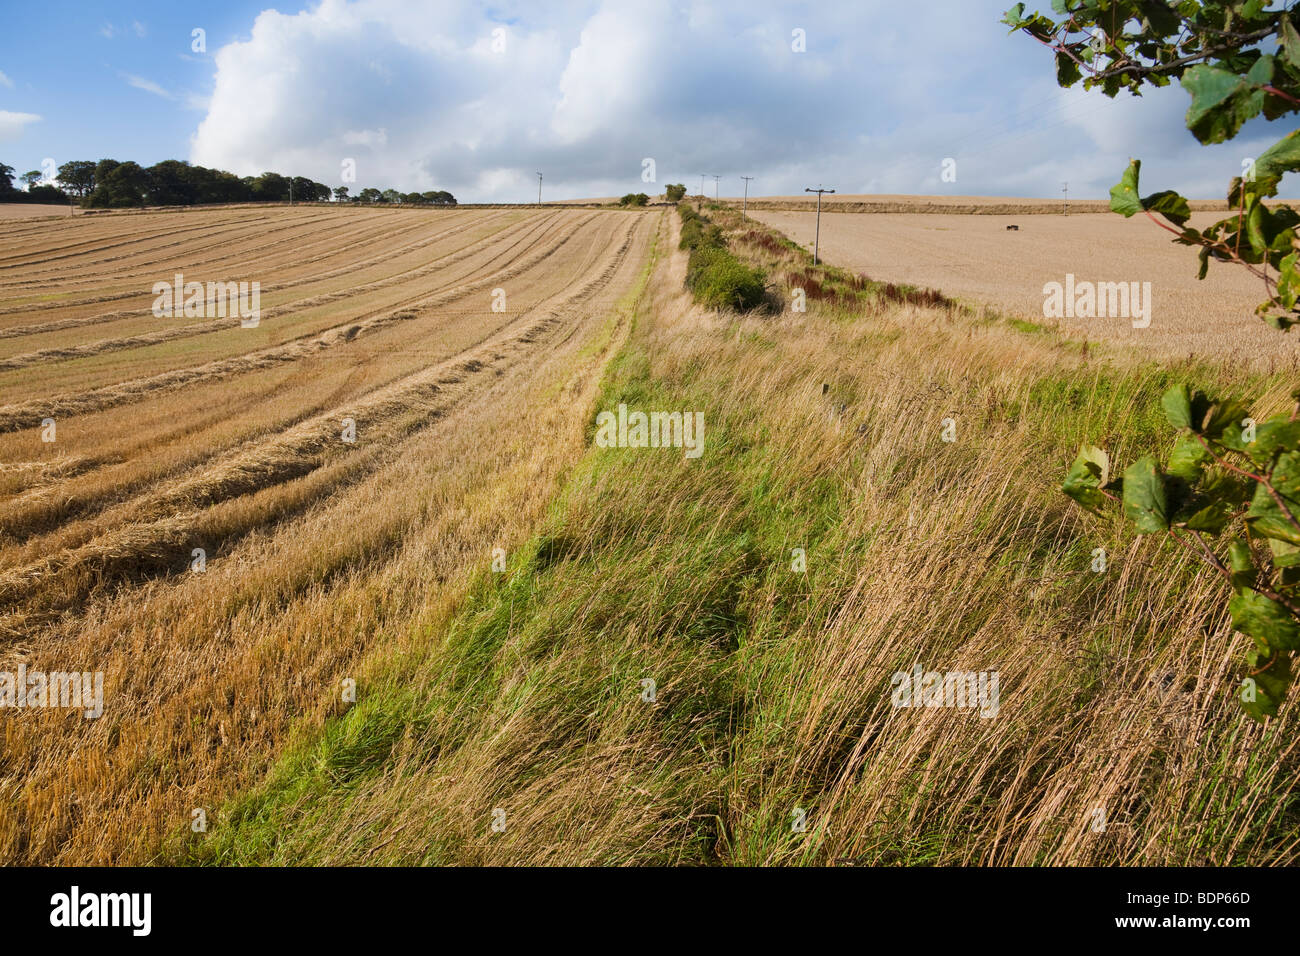 Summer barley crop fields, one just cut, one ready to cut Stock Photo